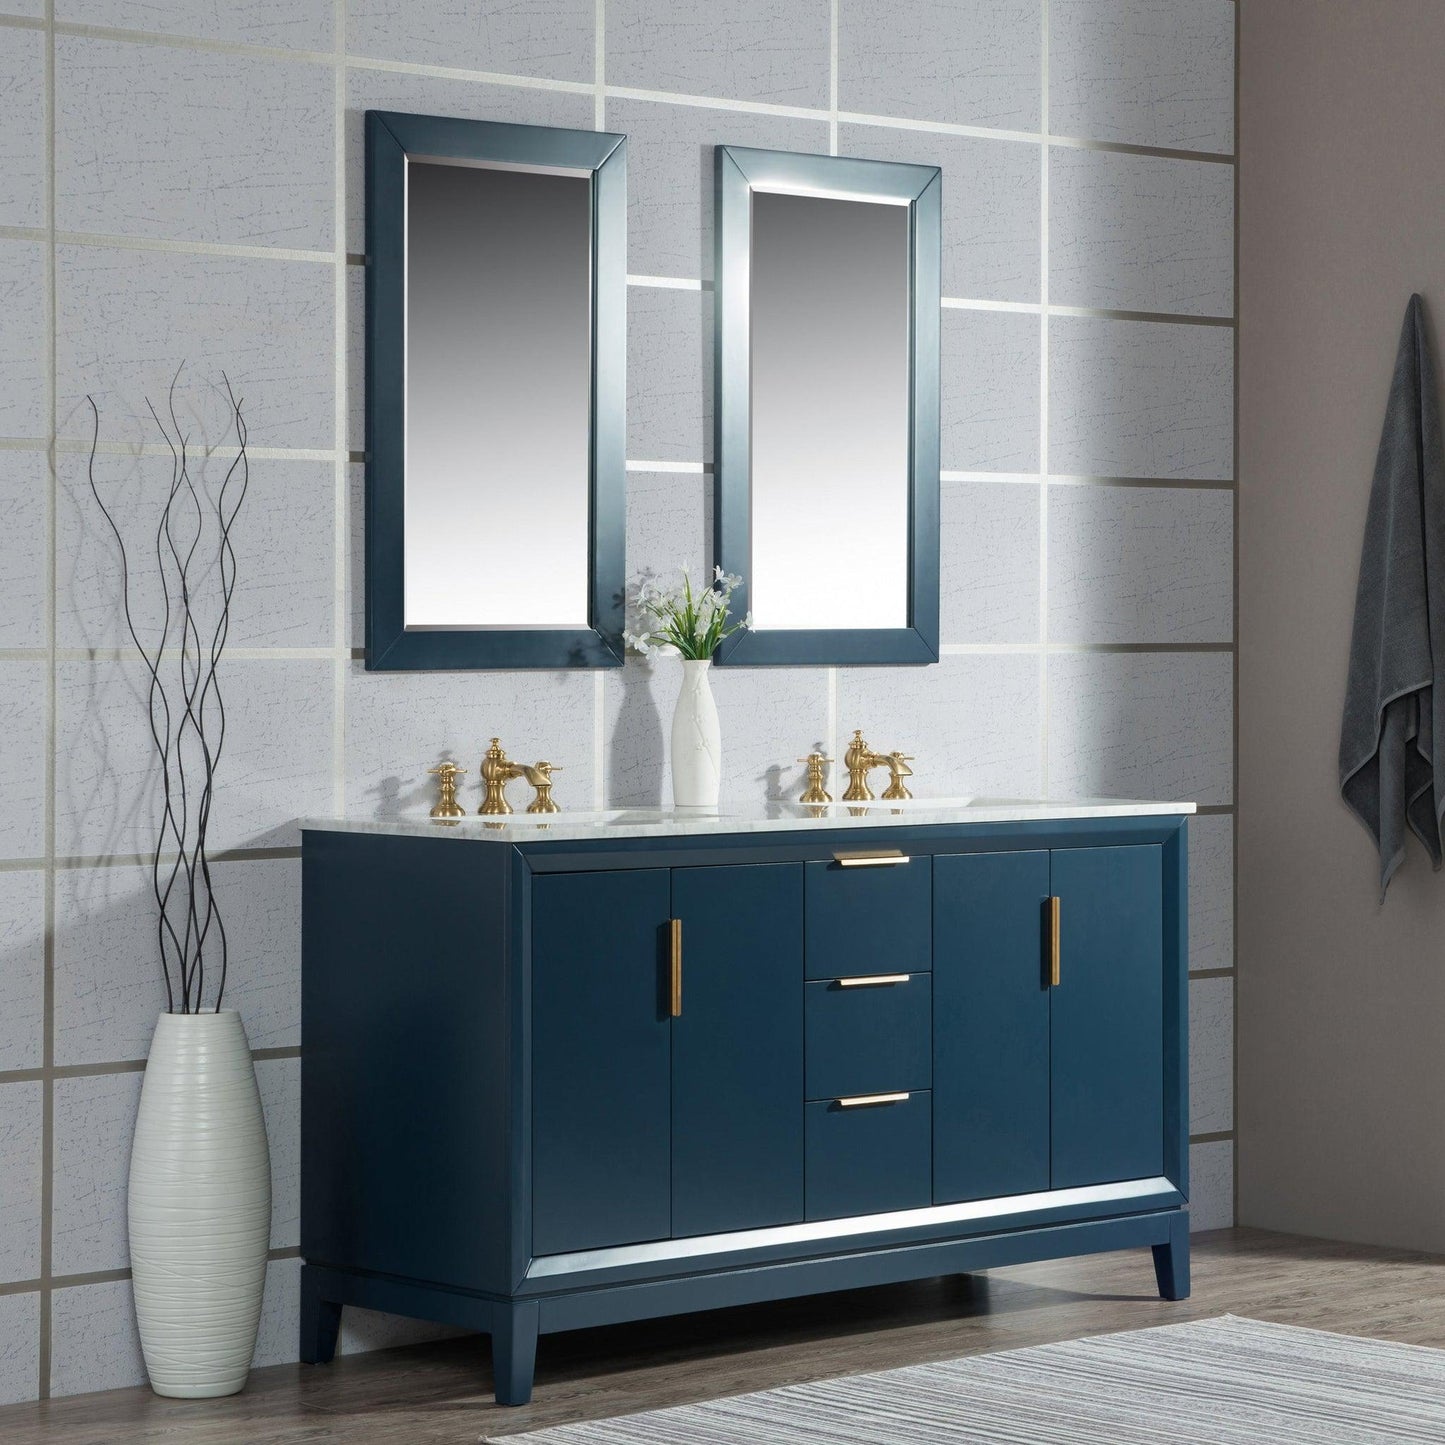 Water Creation Elizabeth 60" Double Sink Carrara White Marble Vanity In Monarch Blue With Matching Mirror